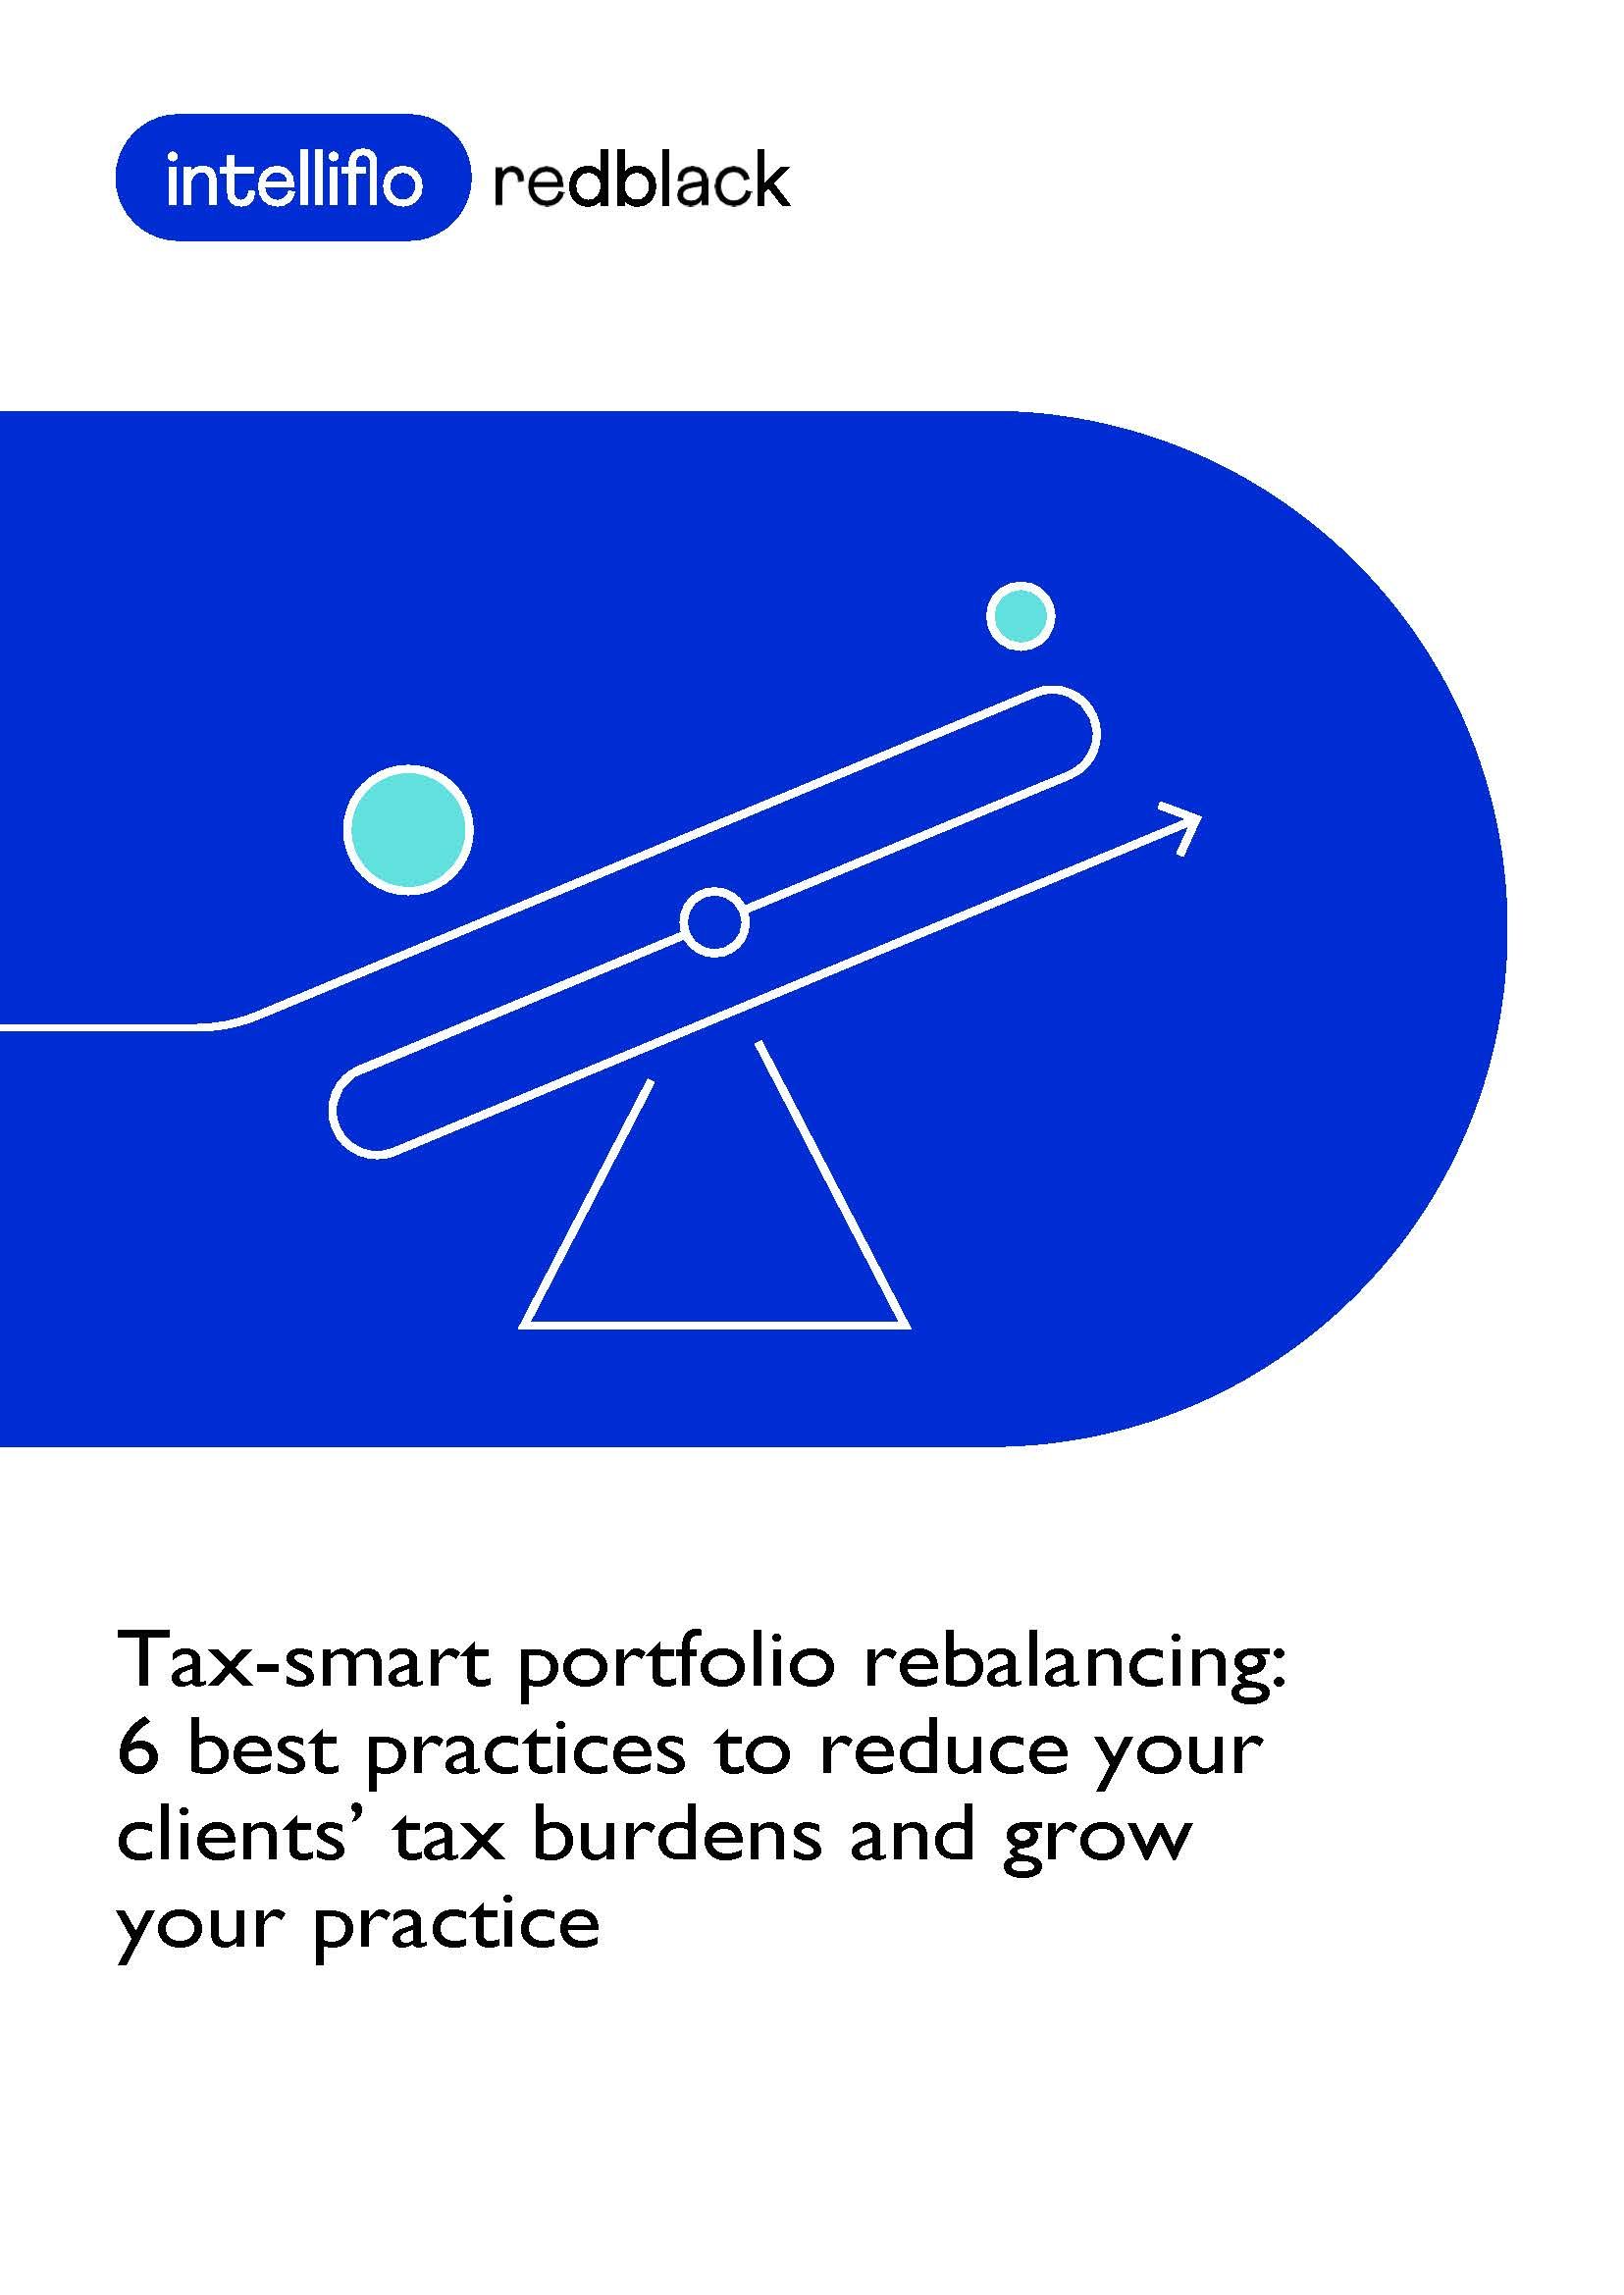 Six steps to reduce your clients’ tax burdens & grow your business